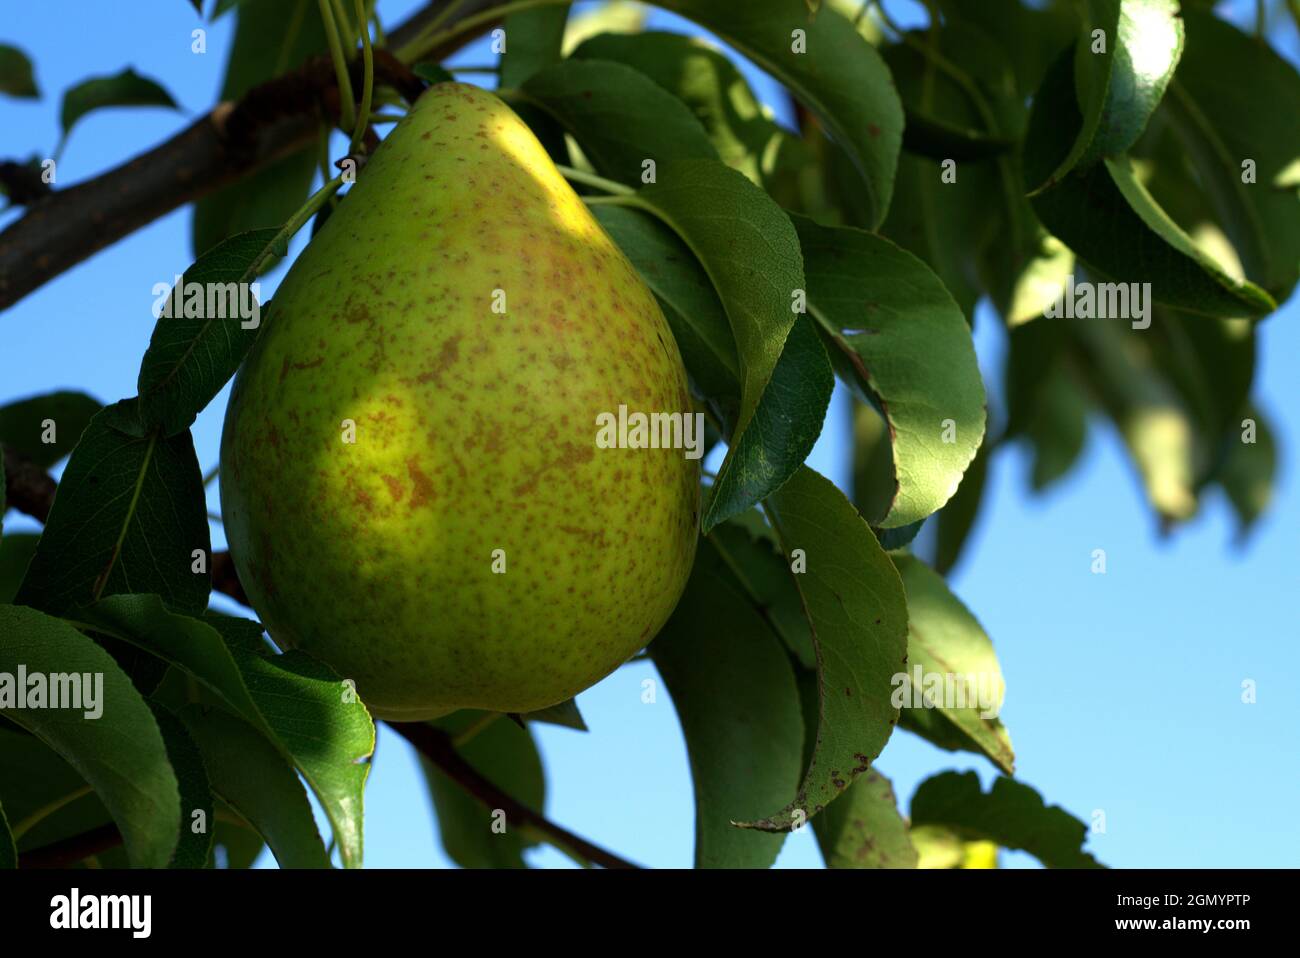 Close up of a pear on the tree with leaves against the blue sky Stock Photo